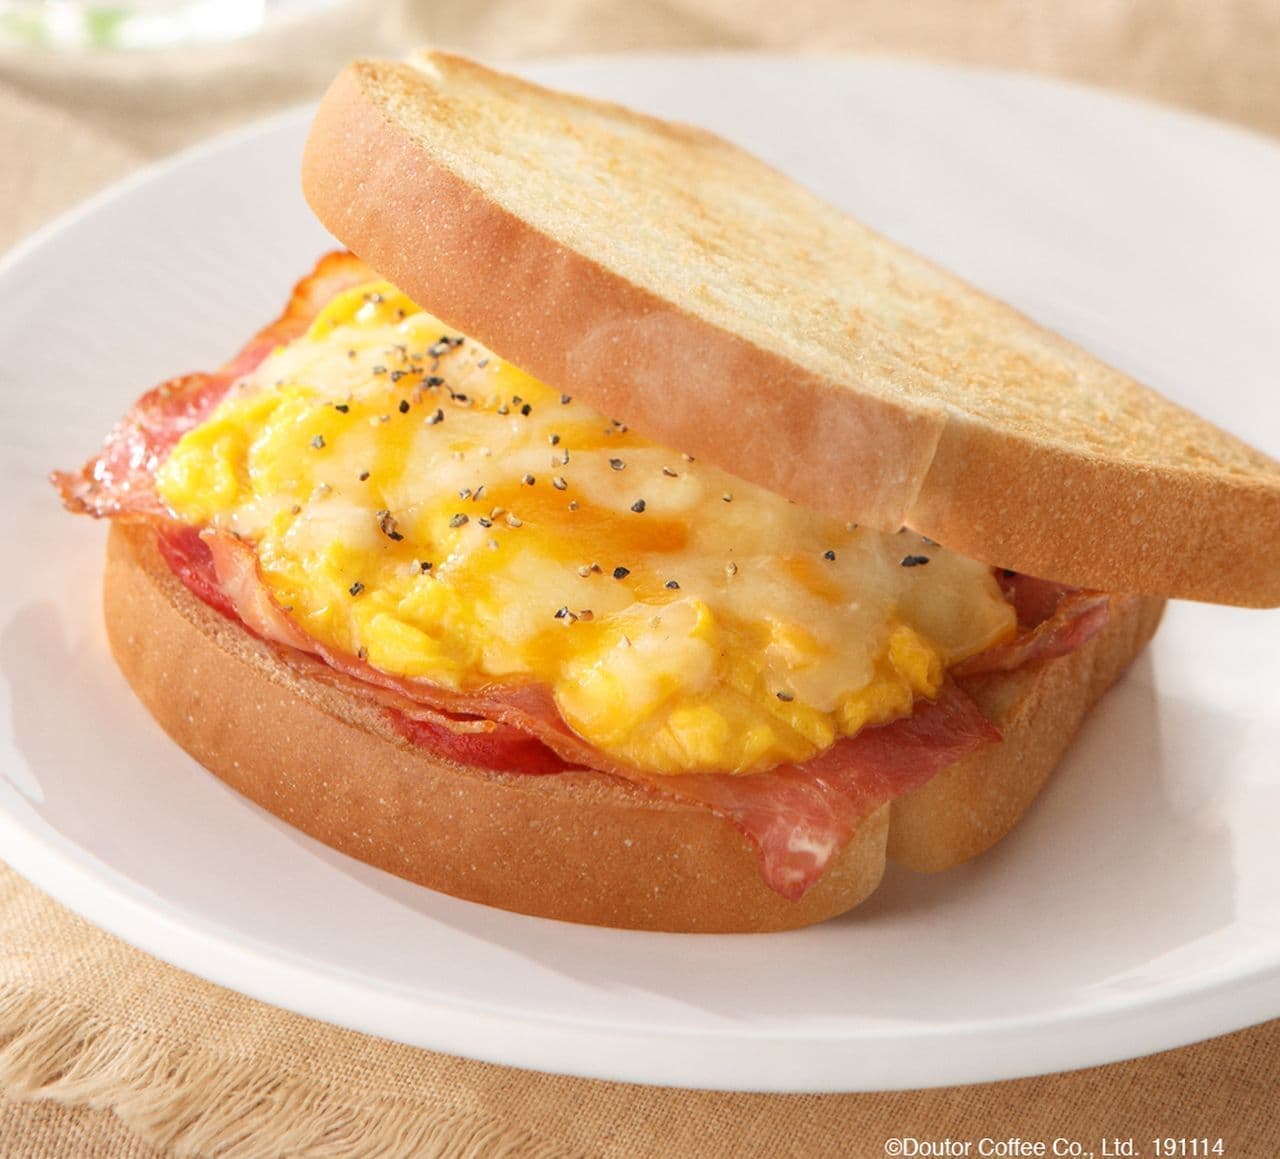 Doutor "Morning Cafe Set B 3 Cheeses and Bacon and Eggs"